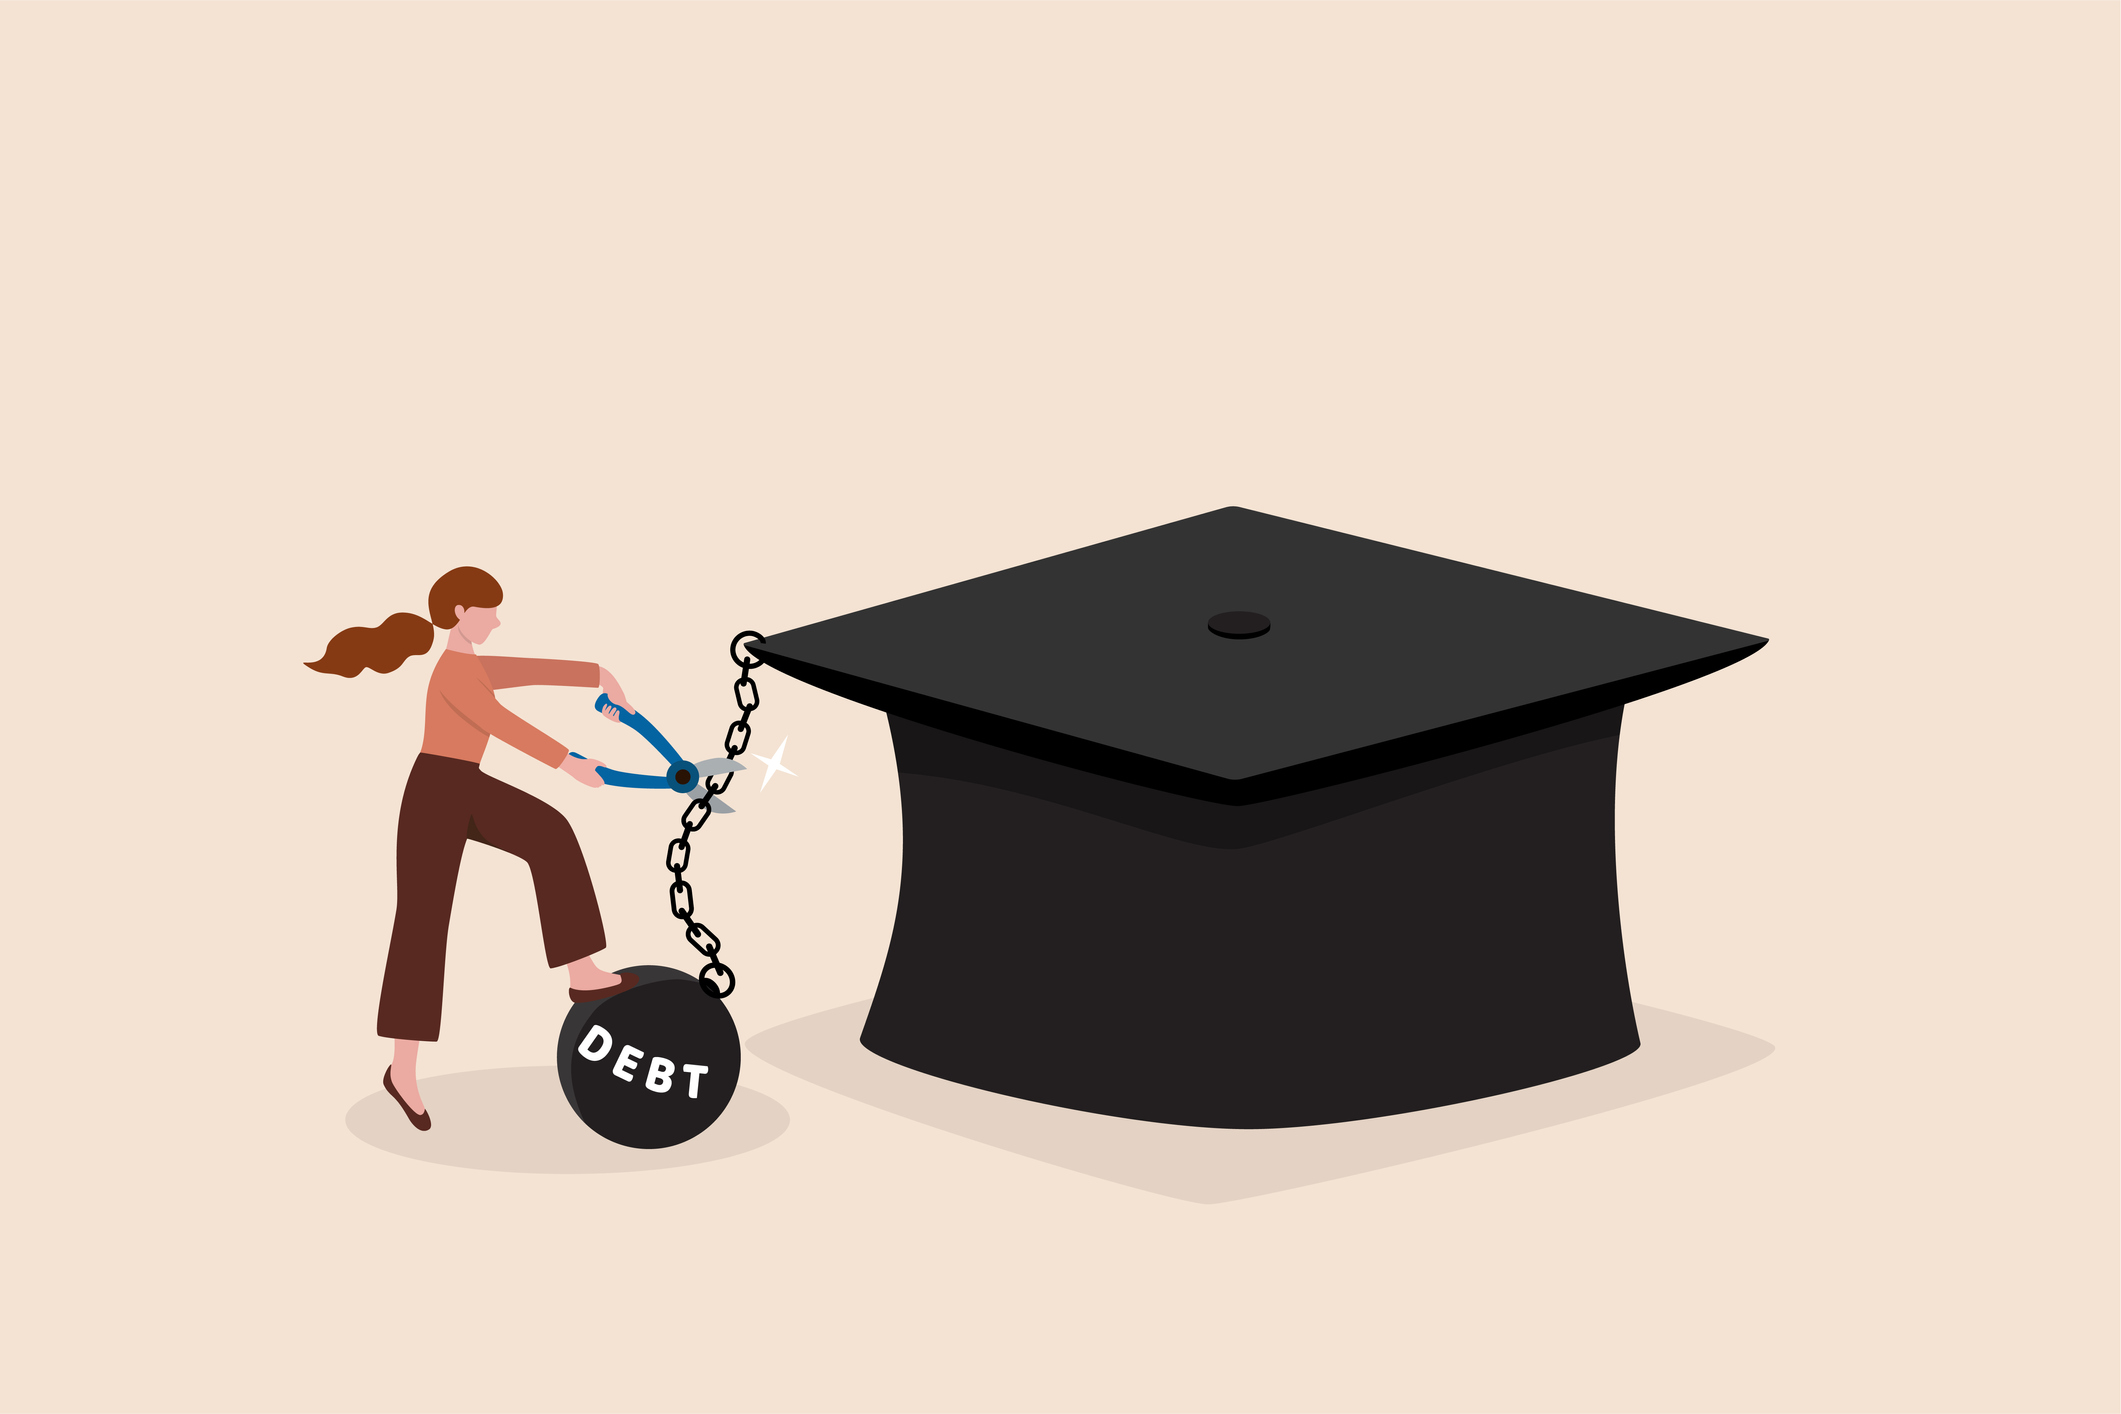 Student Loan Forgiveness Update: More Borrowers to Get Cancellation Notices